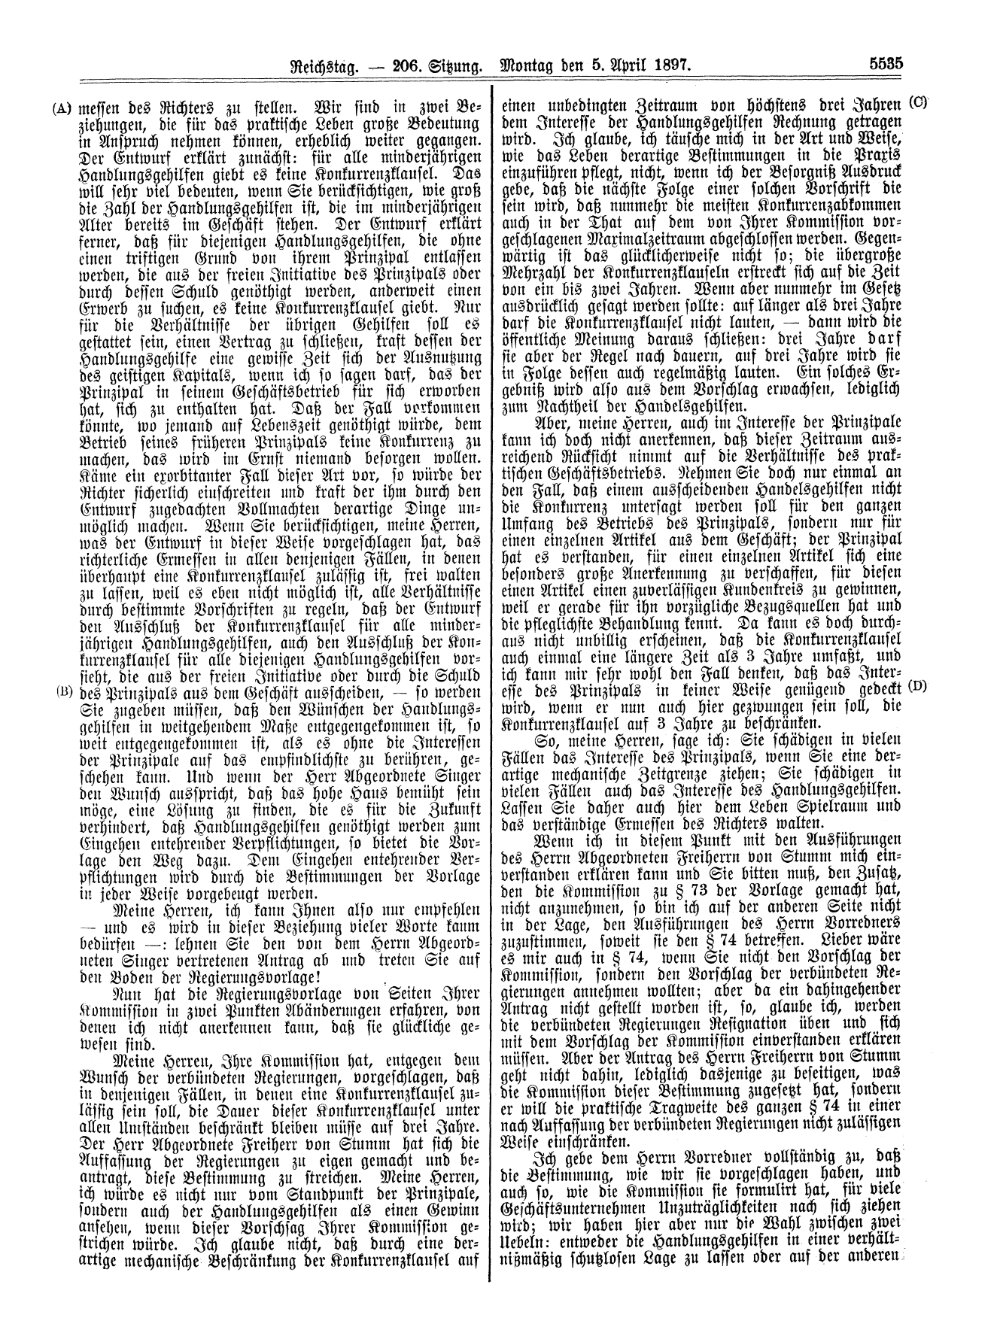 Scan of page 5535